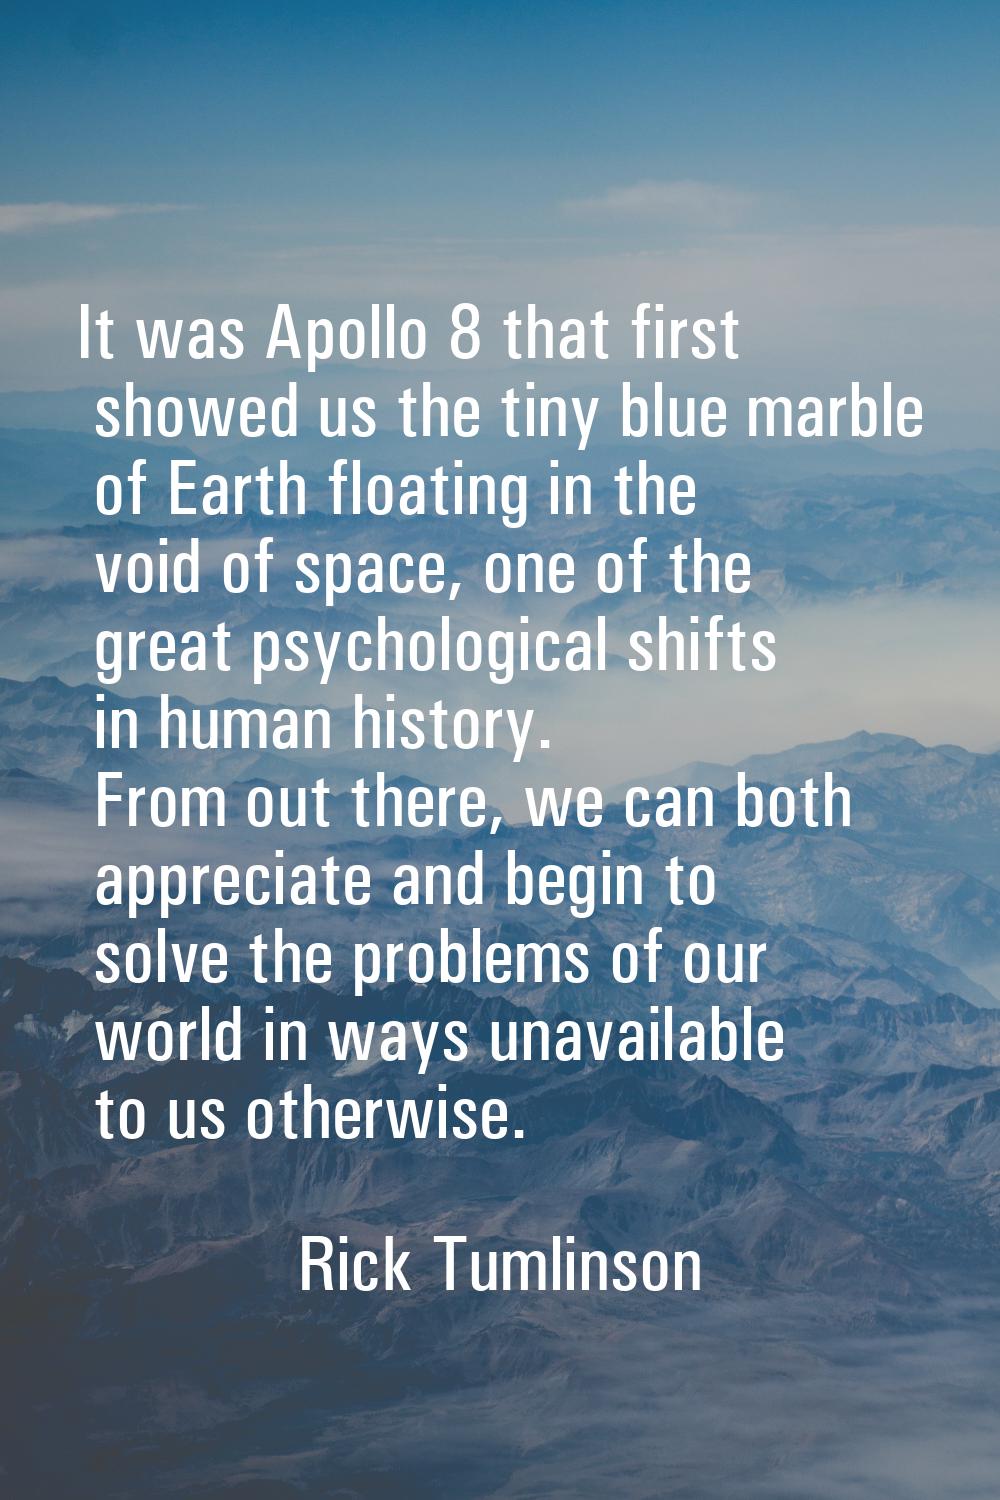 It was Apollo 8 that first showed us the tiny blue marble of Earth floating in the void of space, o